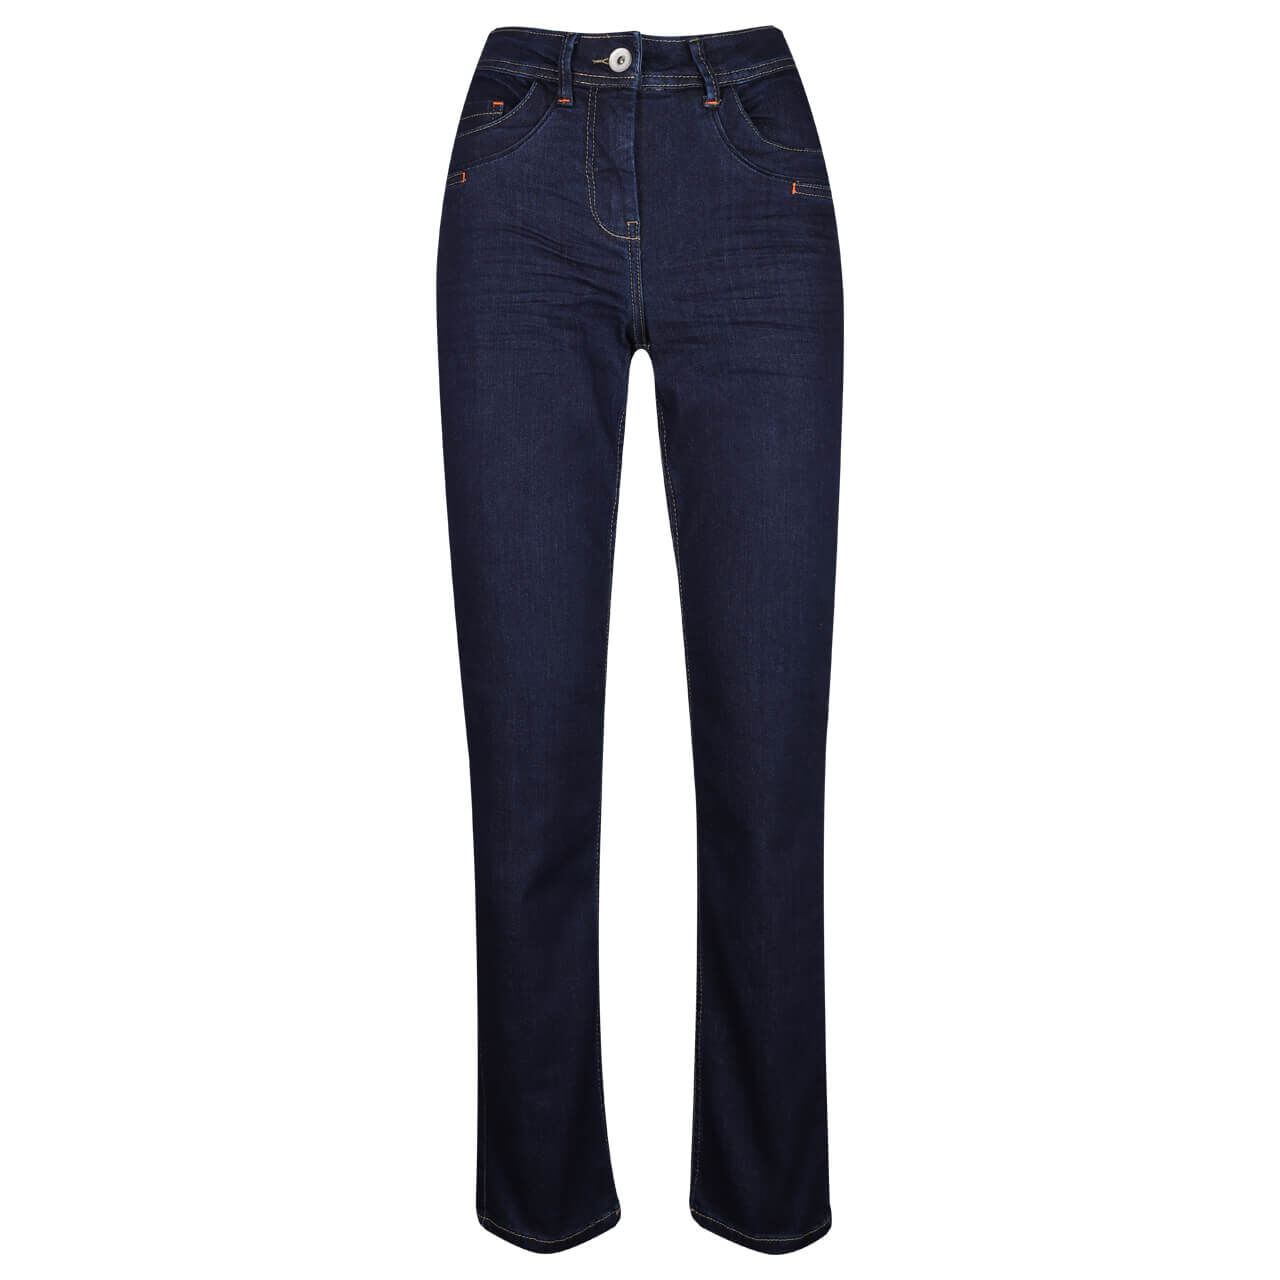 Cecil Toronto Jeans rinsed blue wash